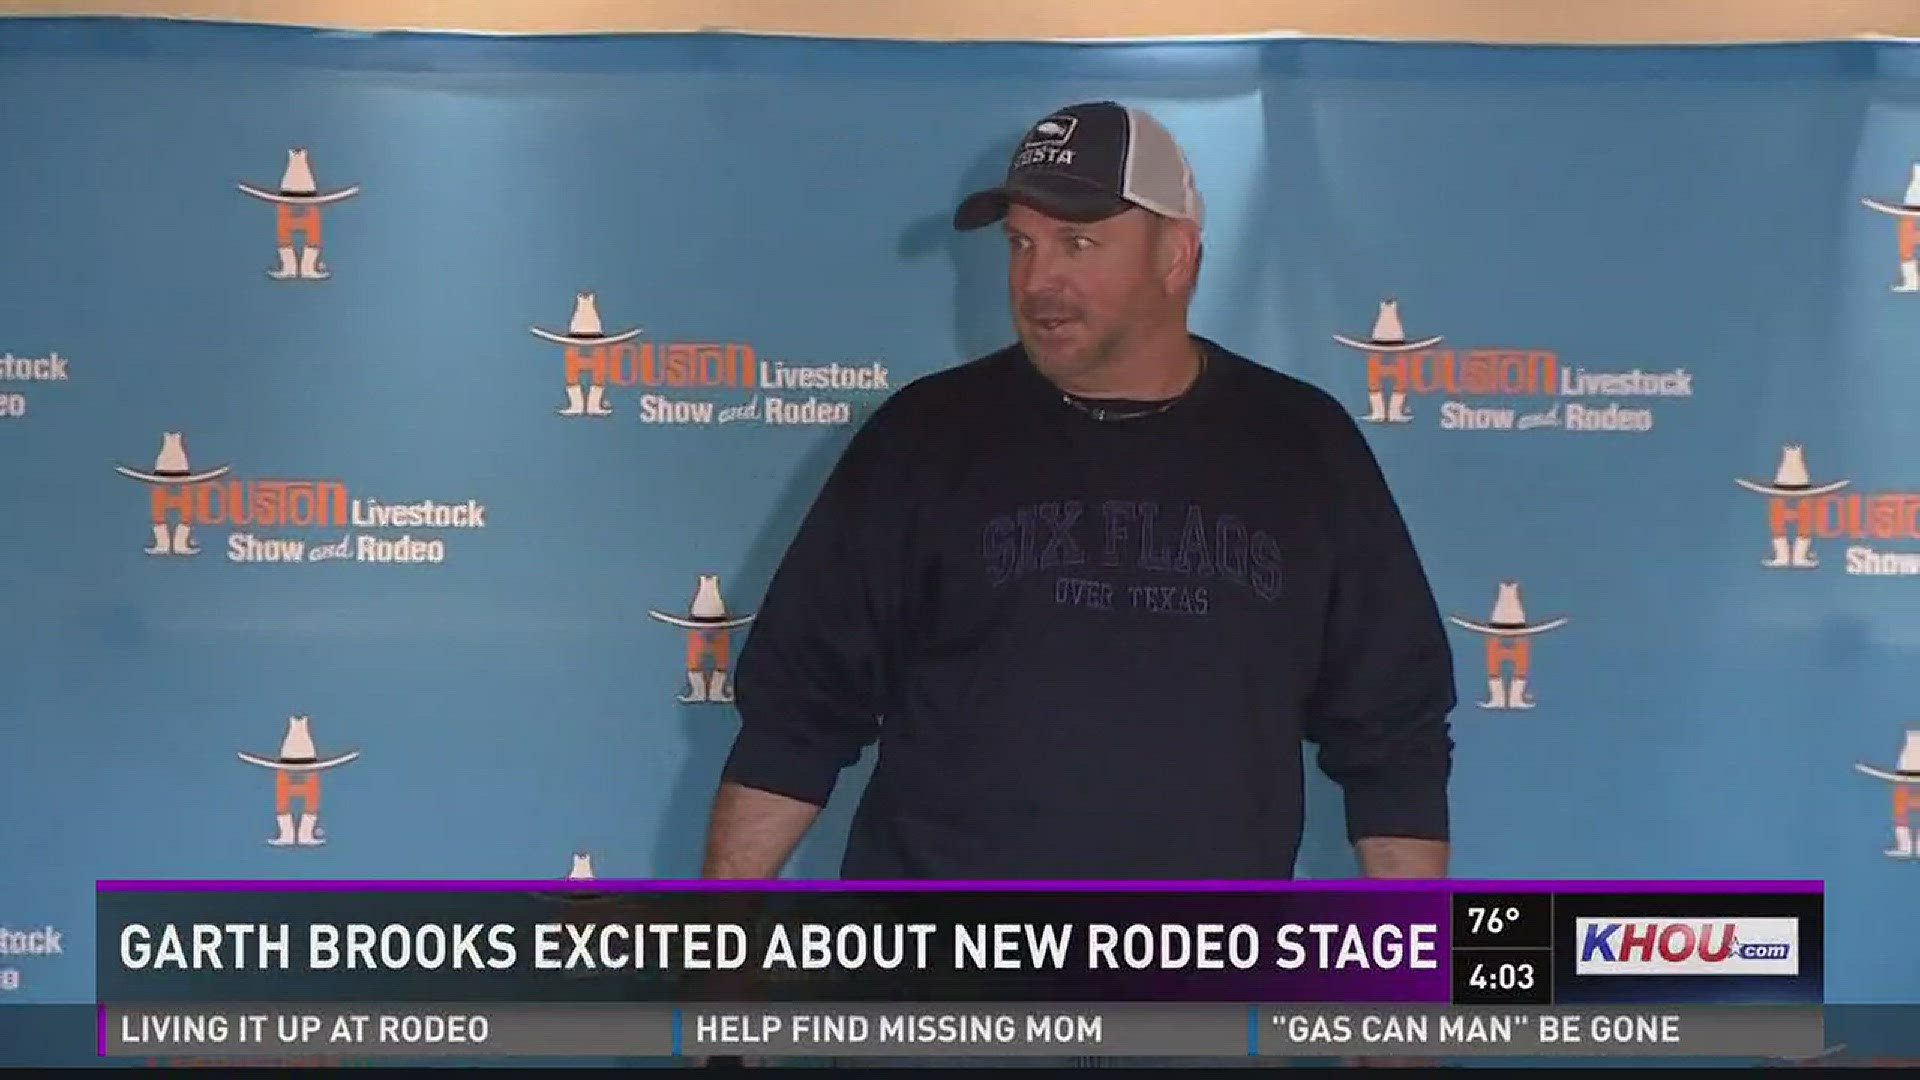 Garth Brooks is excited to perform at the Houston rodeo for the first time in several years.